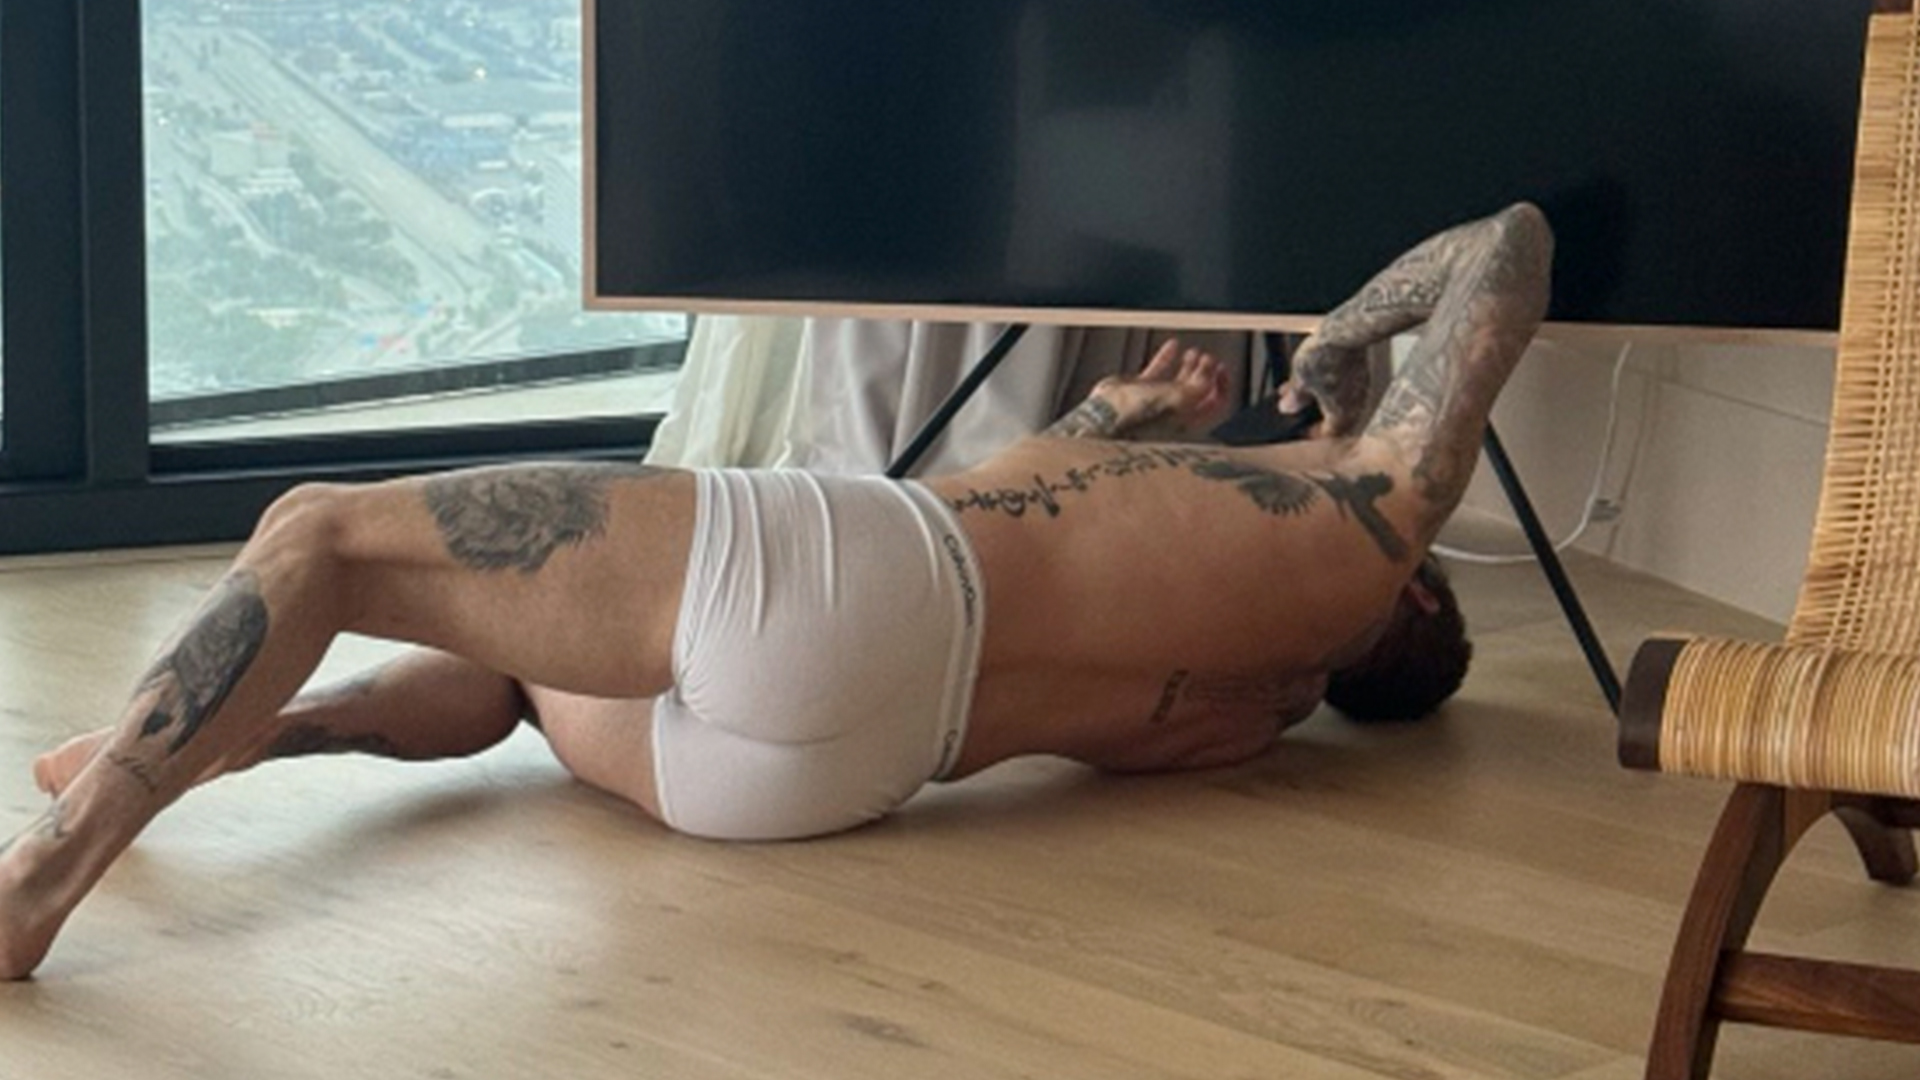 Man Utd legend David Beckham fixes TV in just his boxers as wife Victoria tells fans ‘you’re welcome’